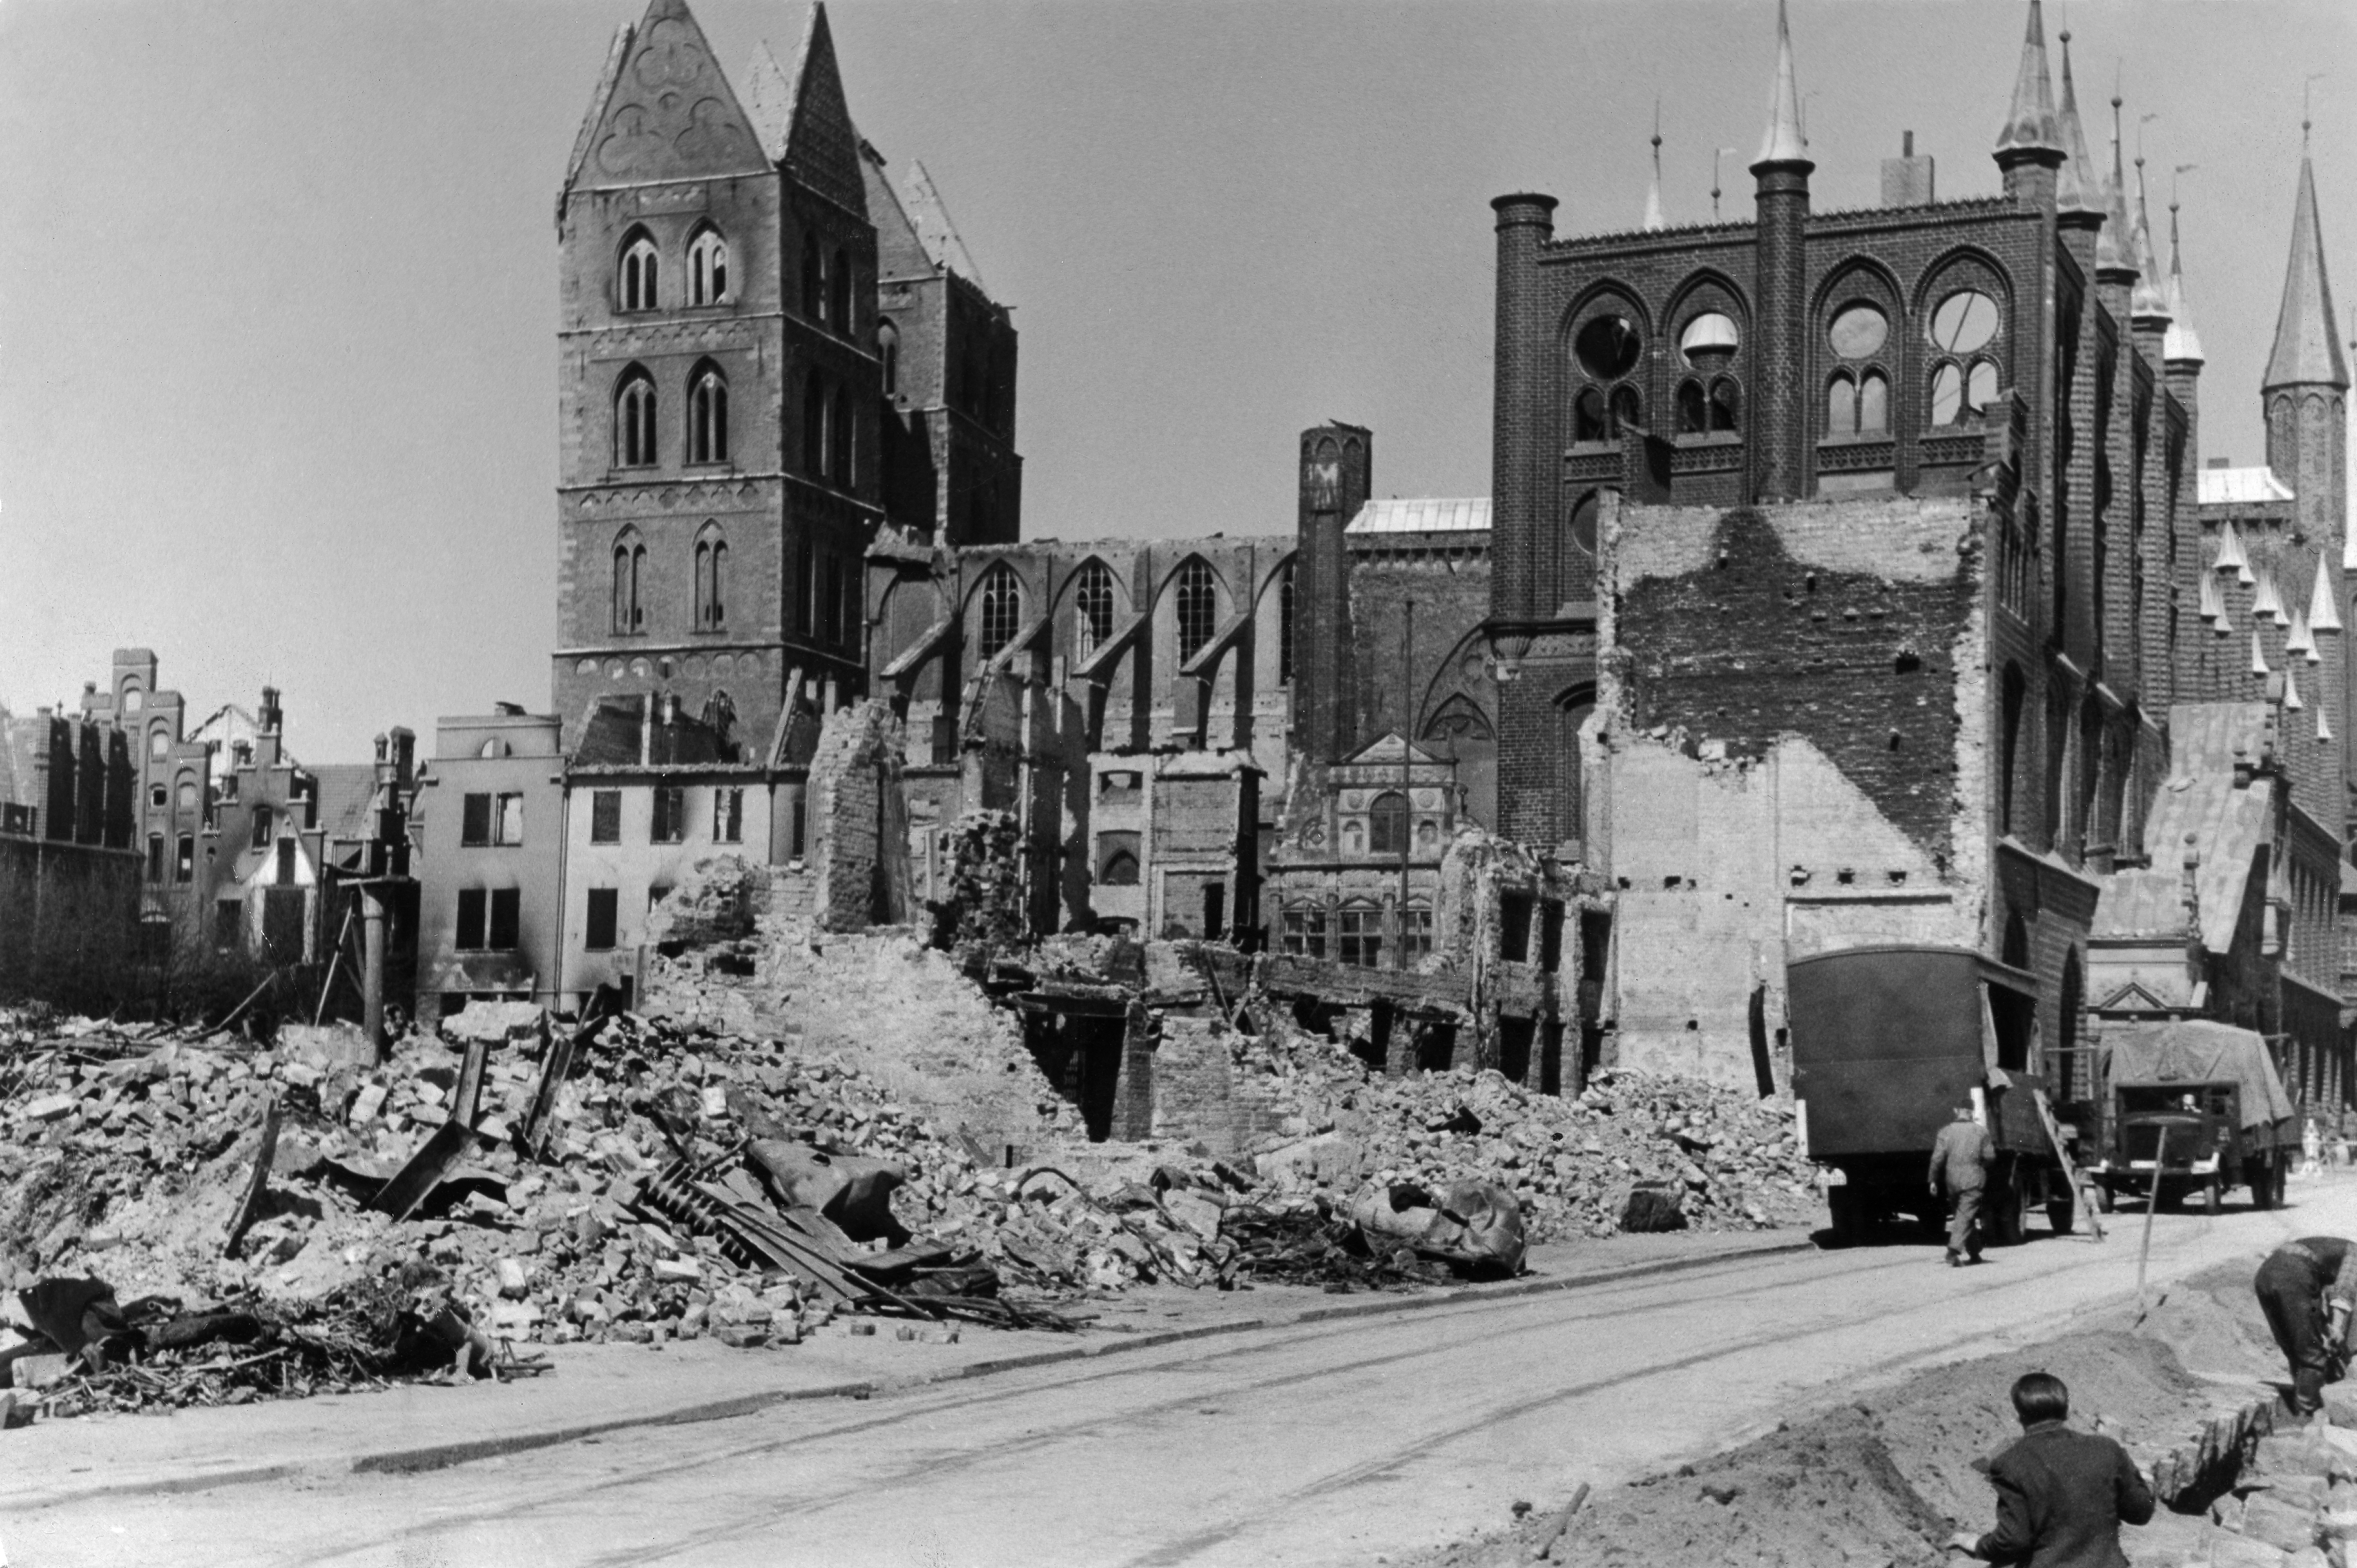 The ruins of St. Mary's Church and the town hall of Lübeck, Germany after the RAF raid on March 28-29, 1942.(Ullstein Bild/Getty Images)